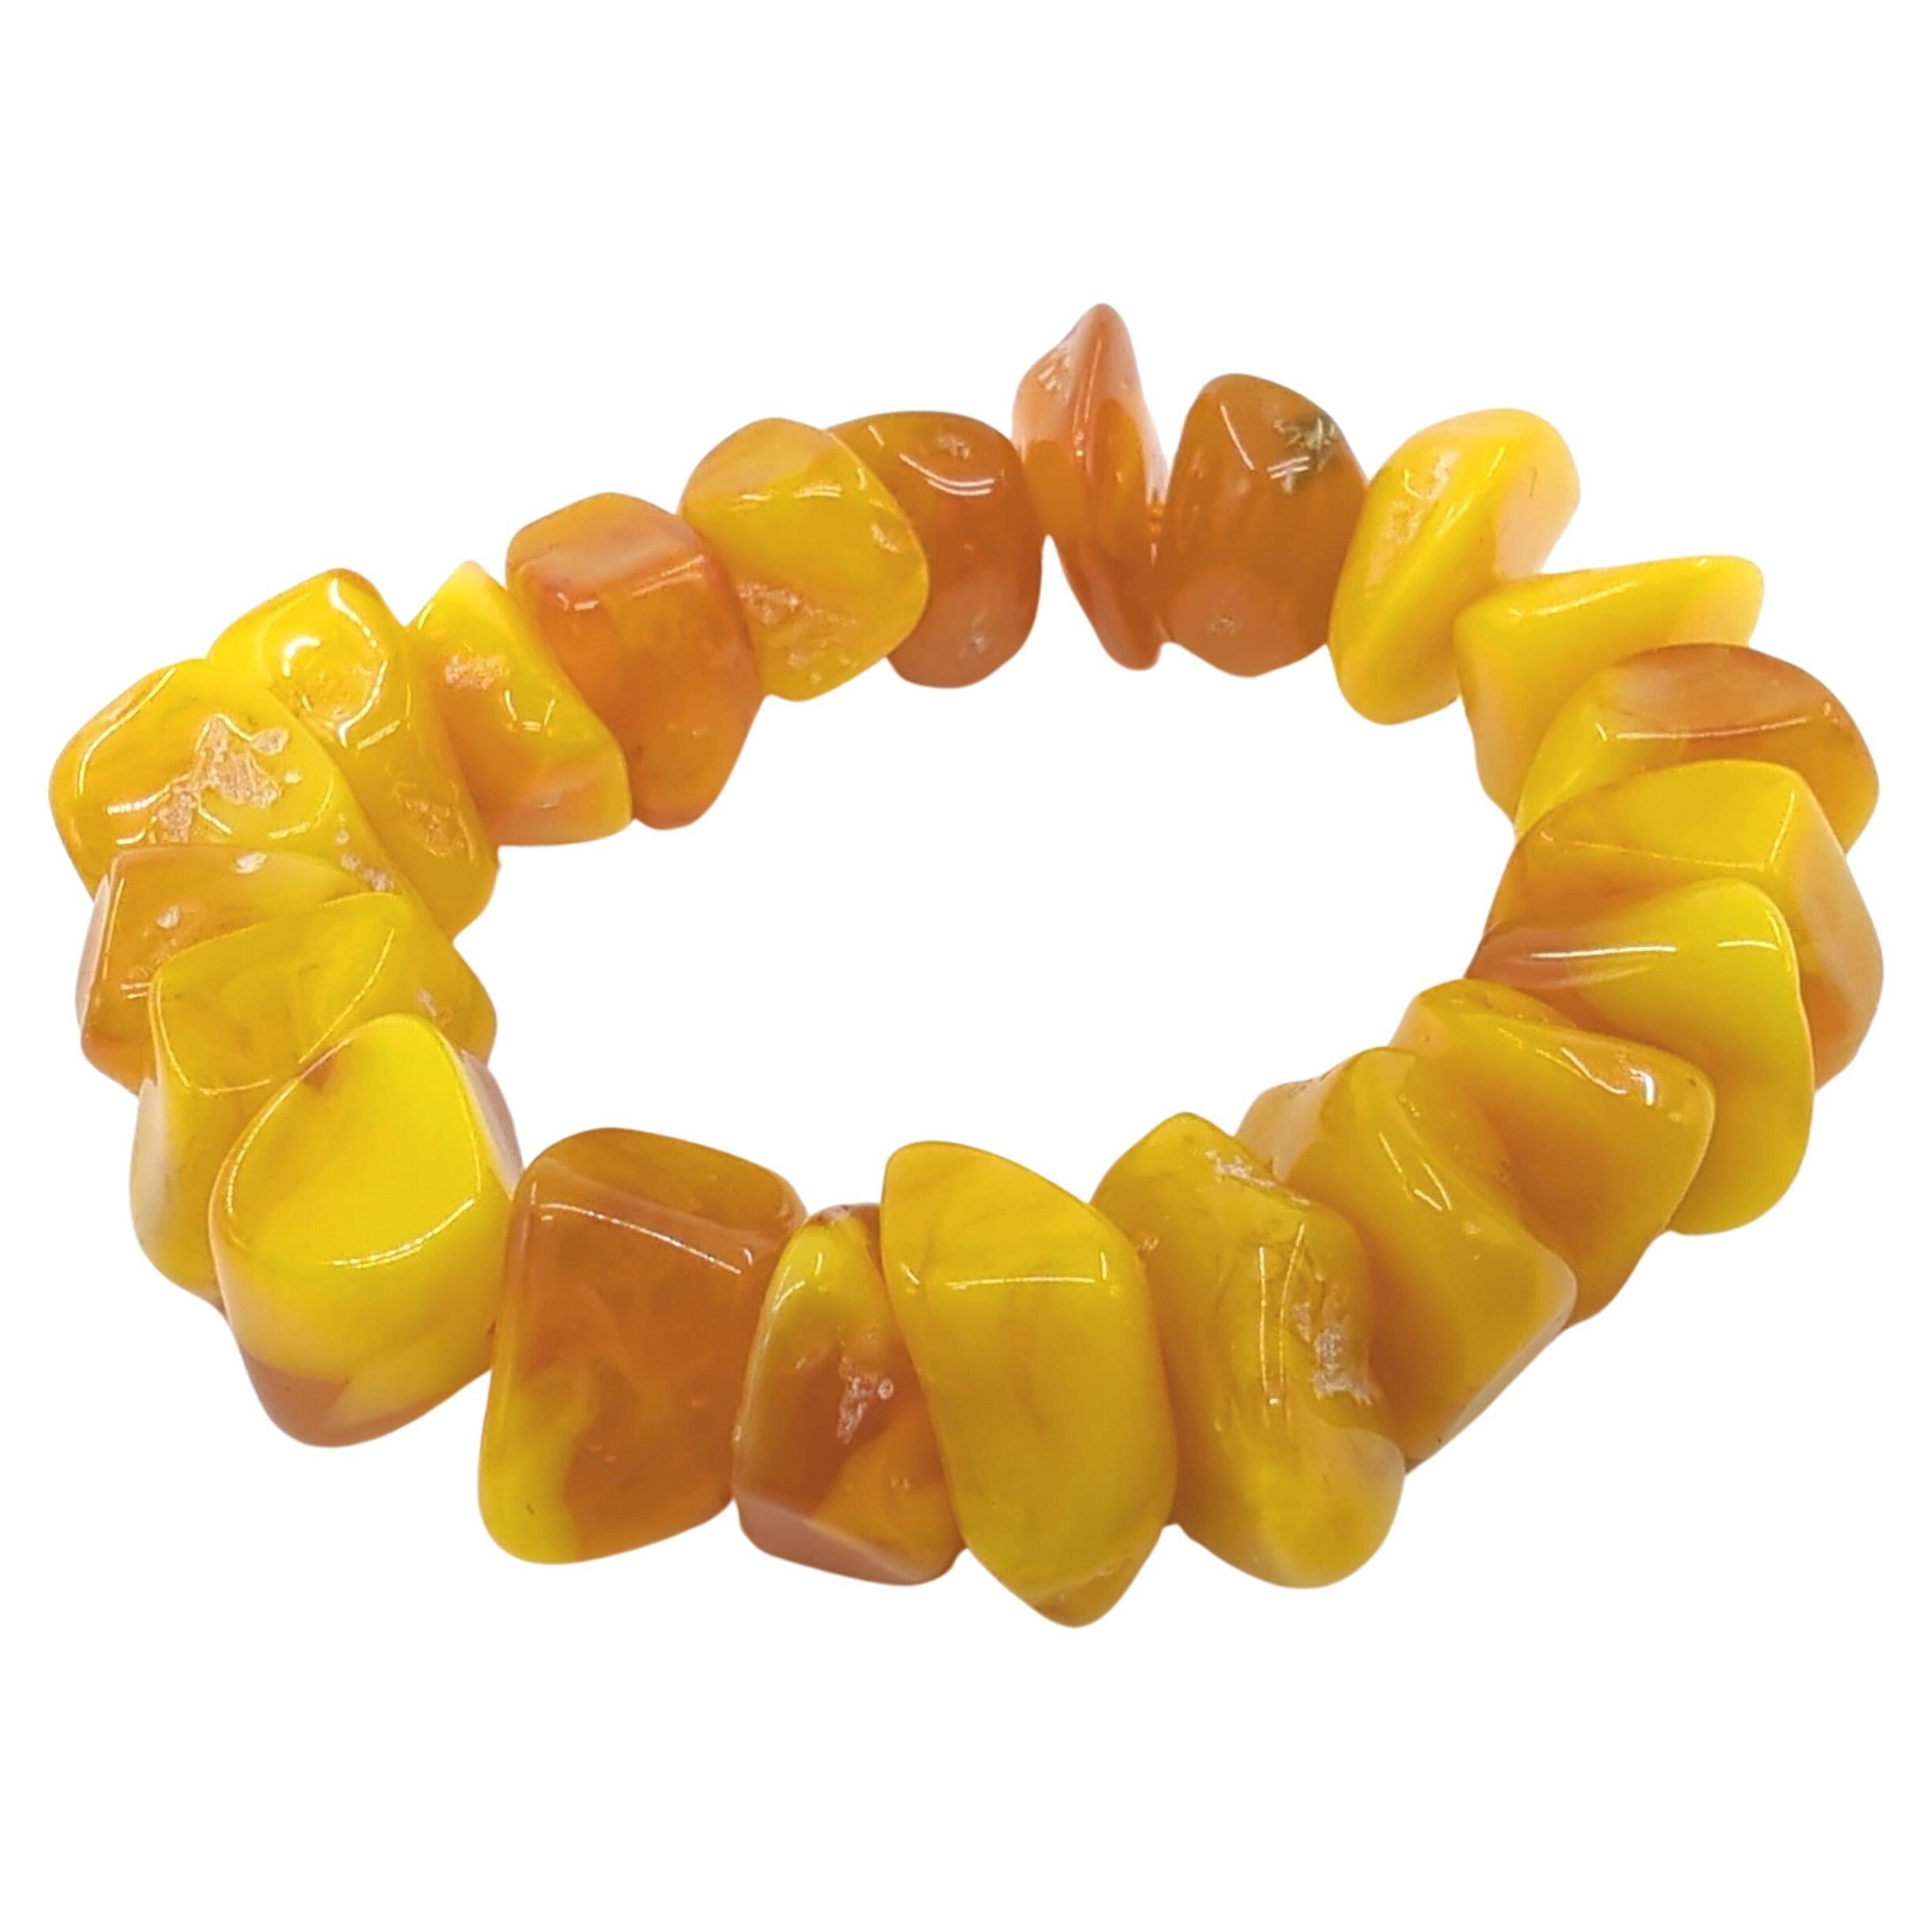 Chinese Vintage Natural Form Polished Beeswax Bracelet Intense Yellow Color For Sale